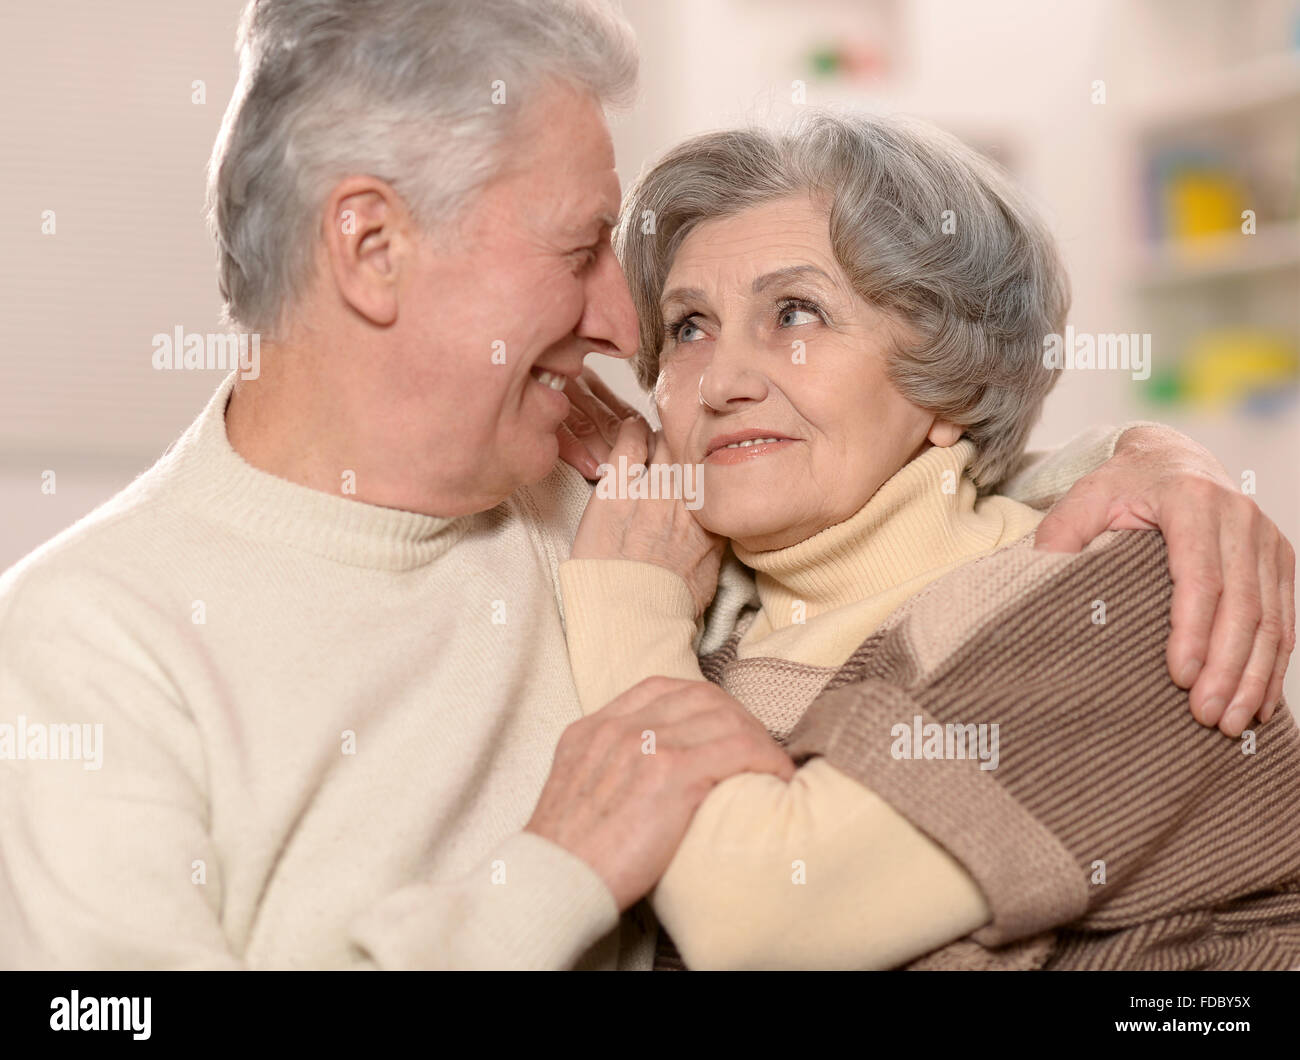 Elderly people sitting on couch Stock Photo